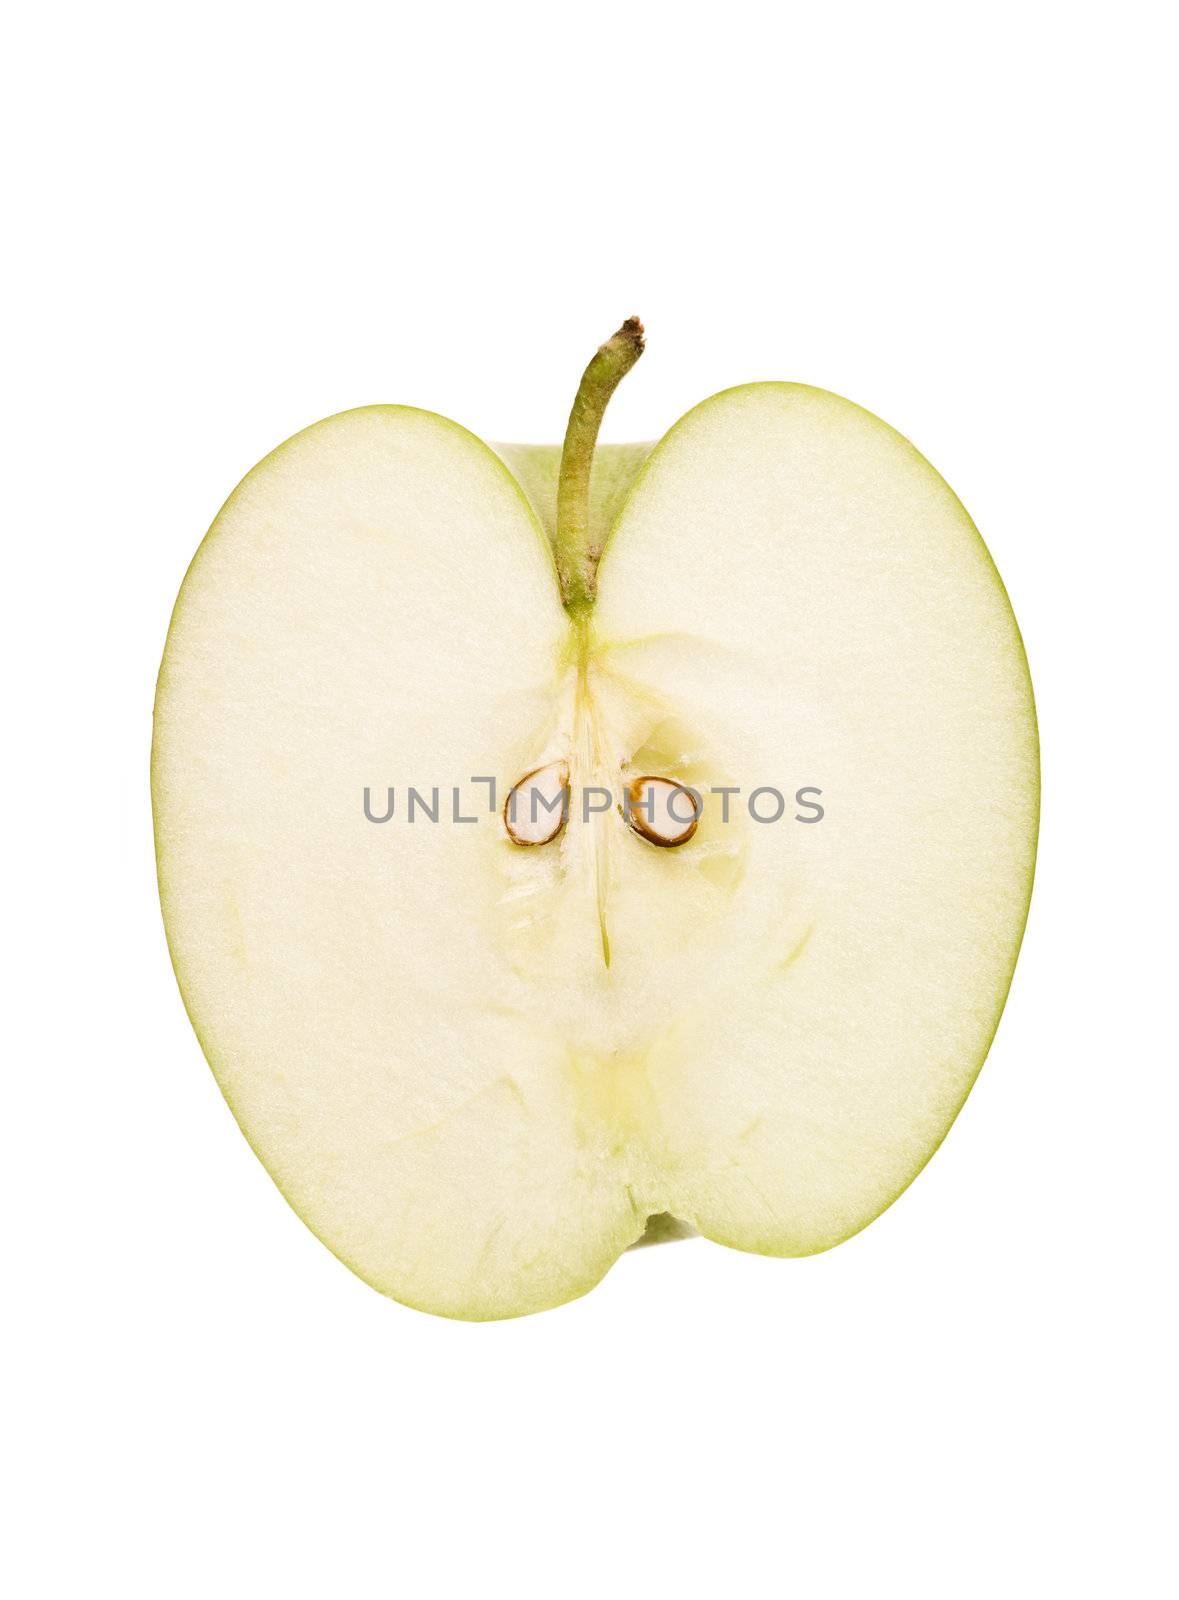 Apple cut in half isolated on white background